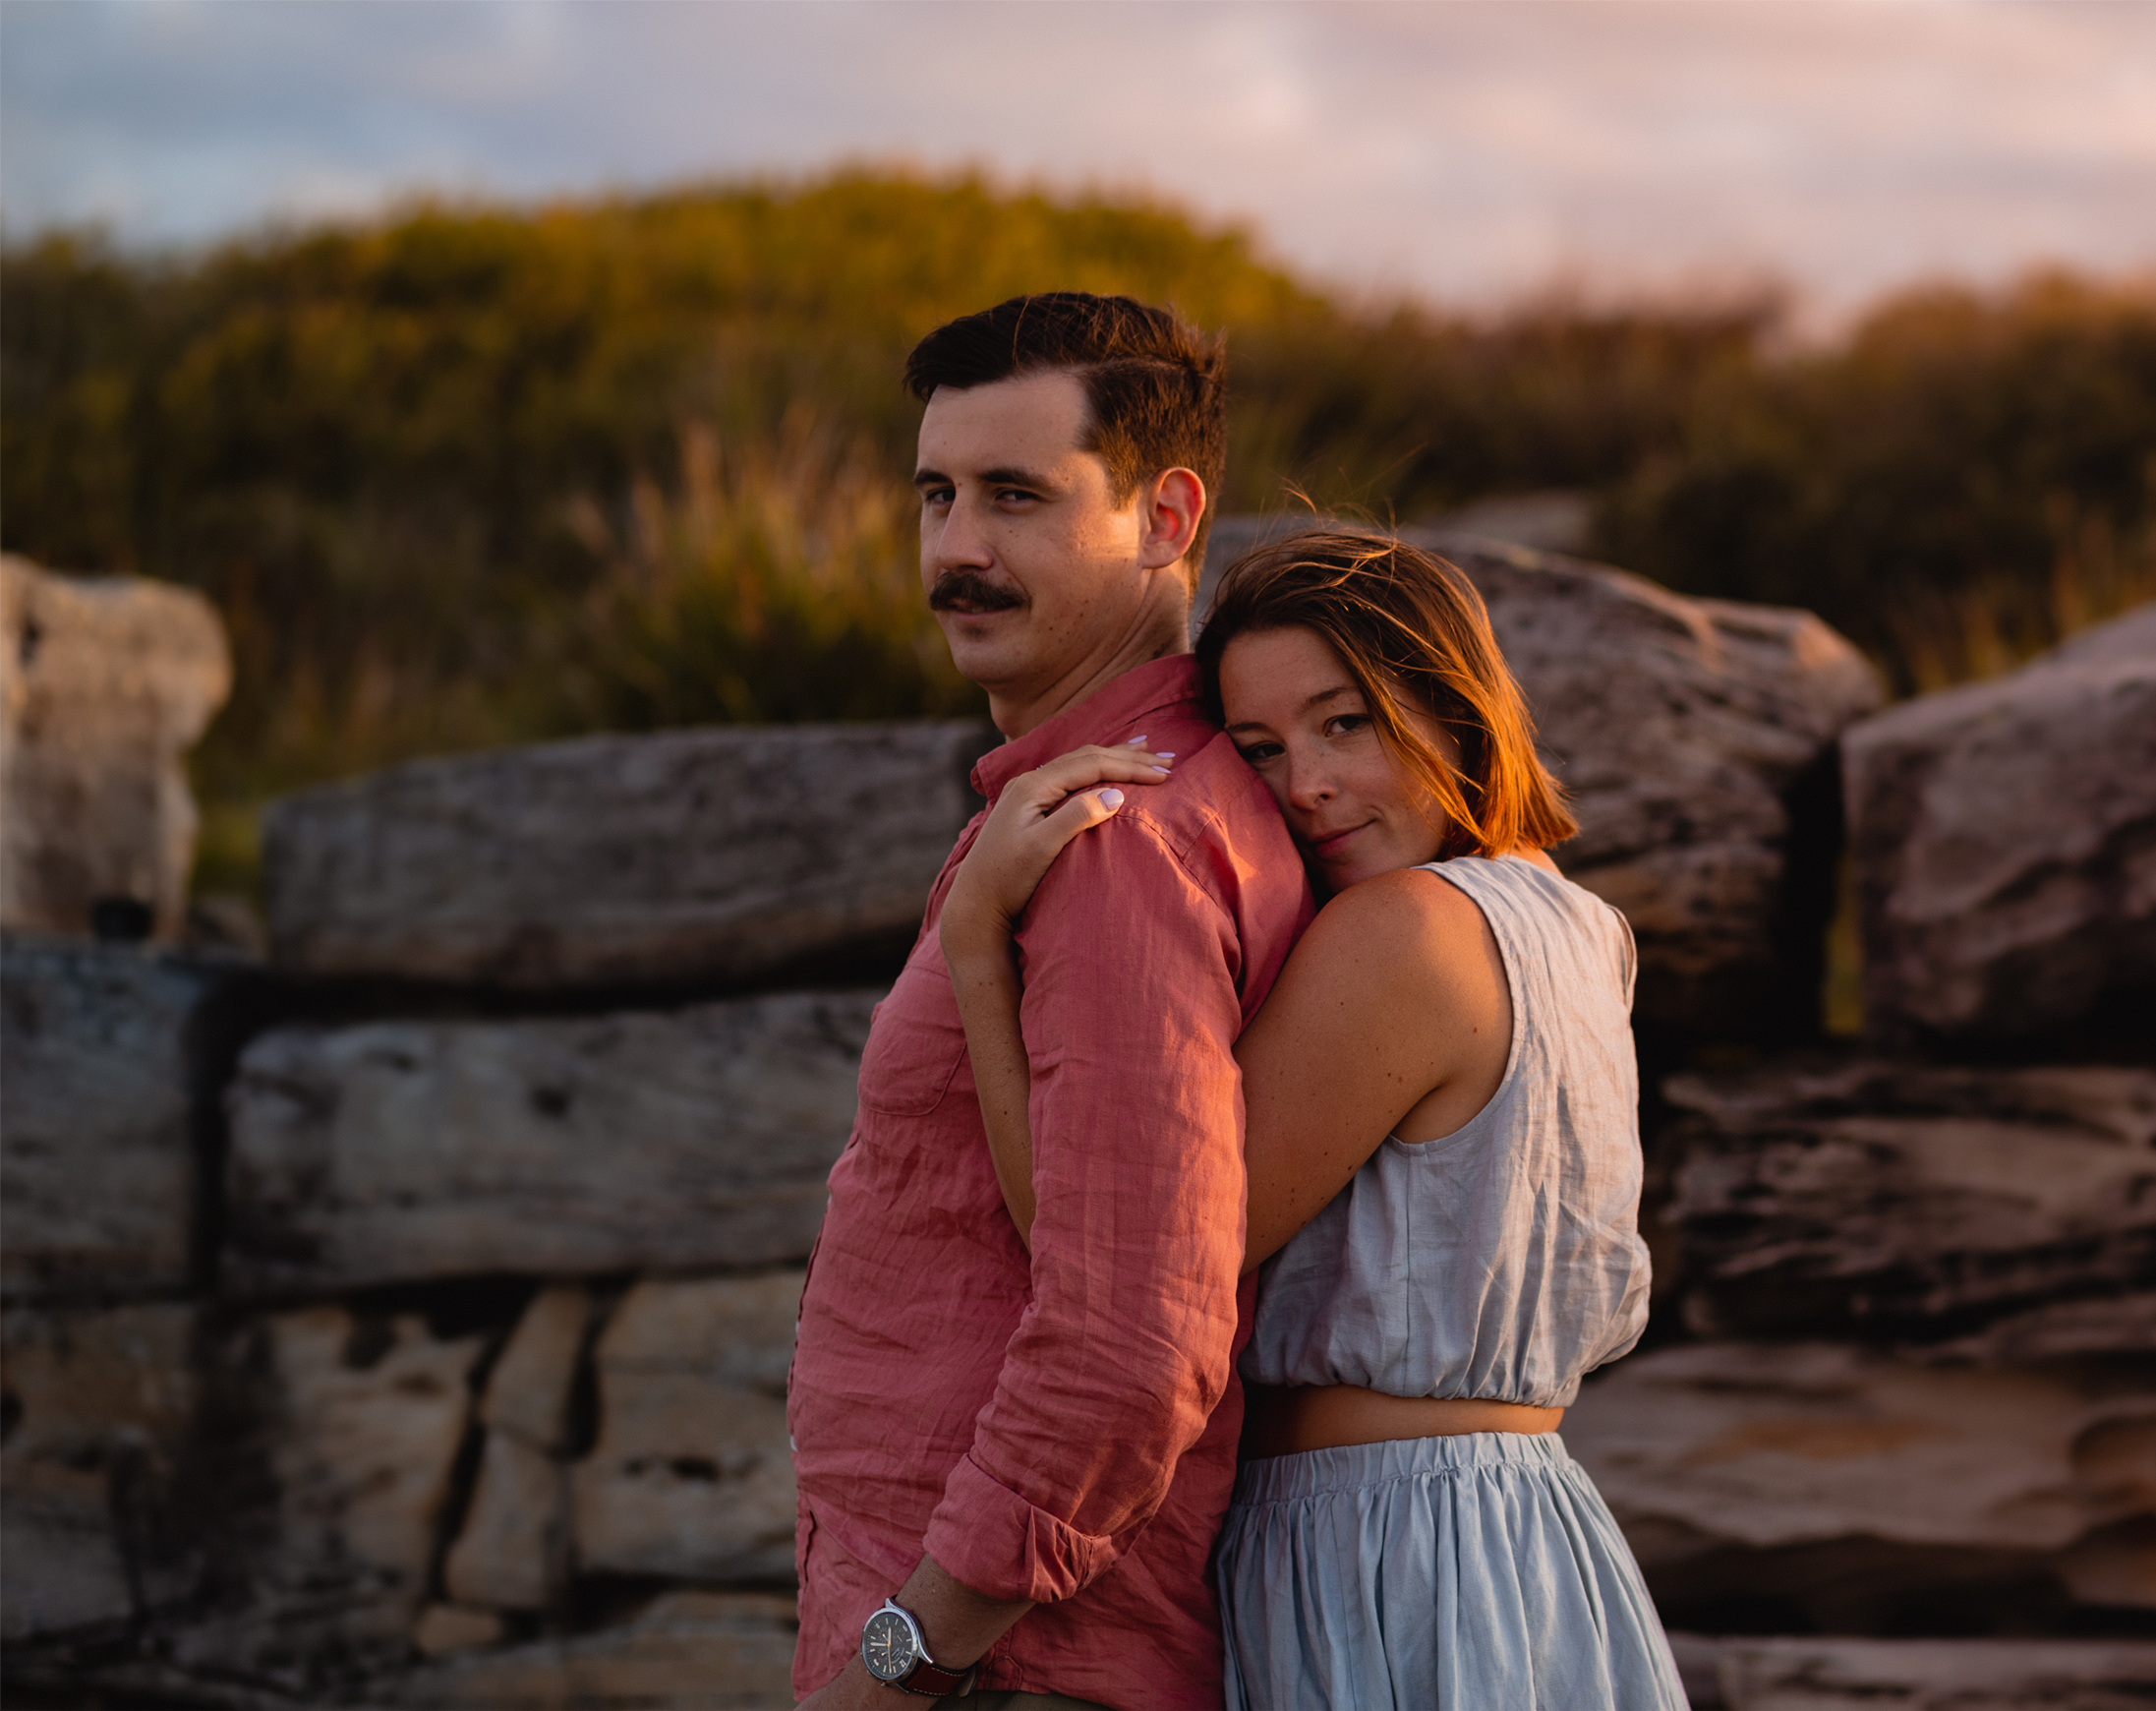 Benefits of an engagement photography session